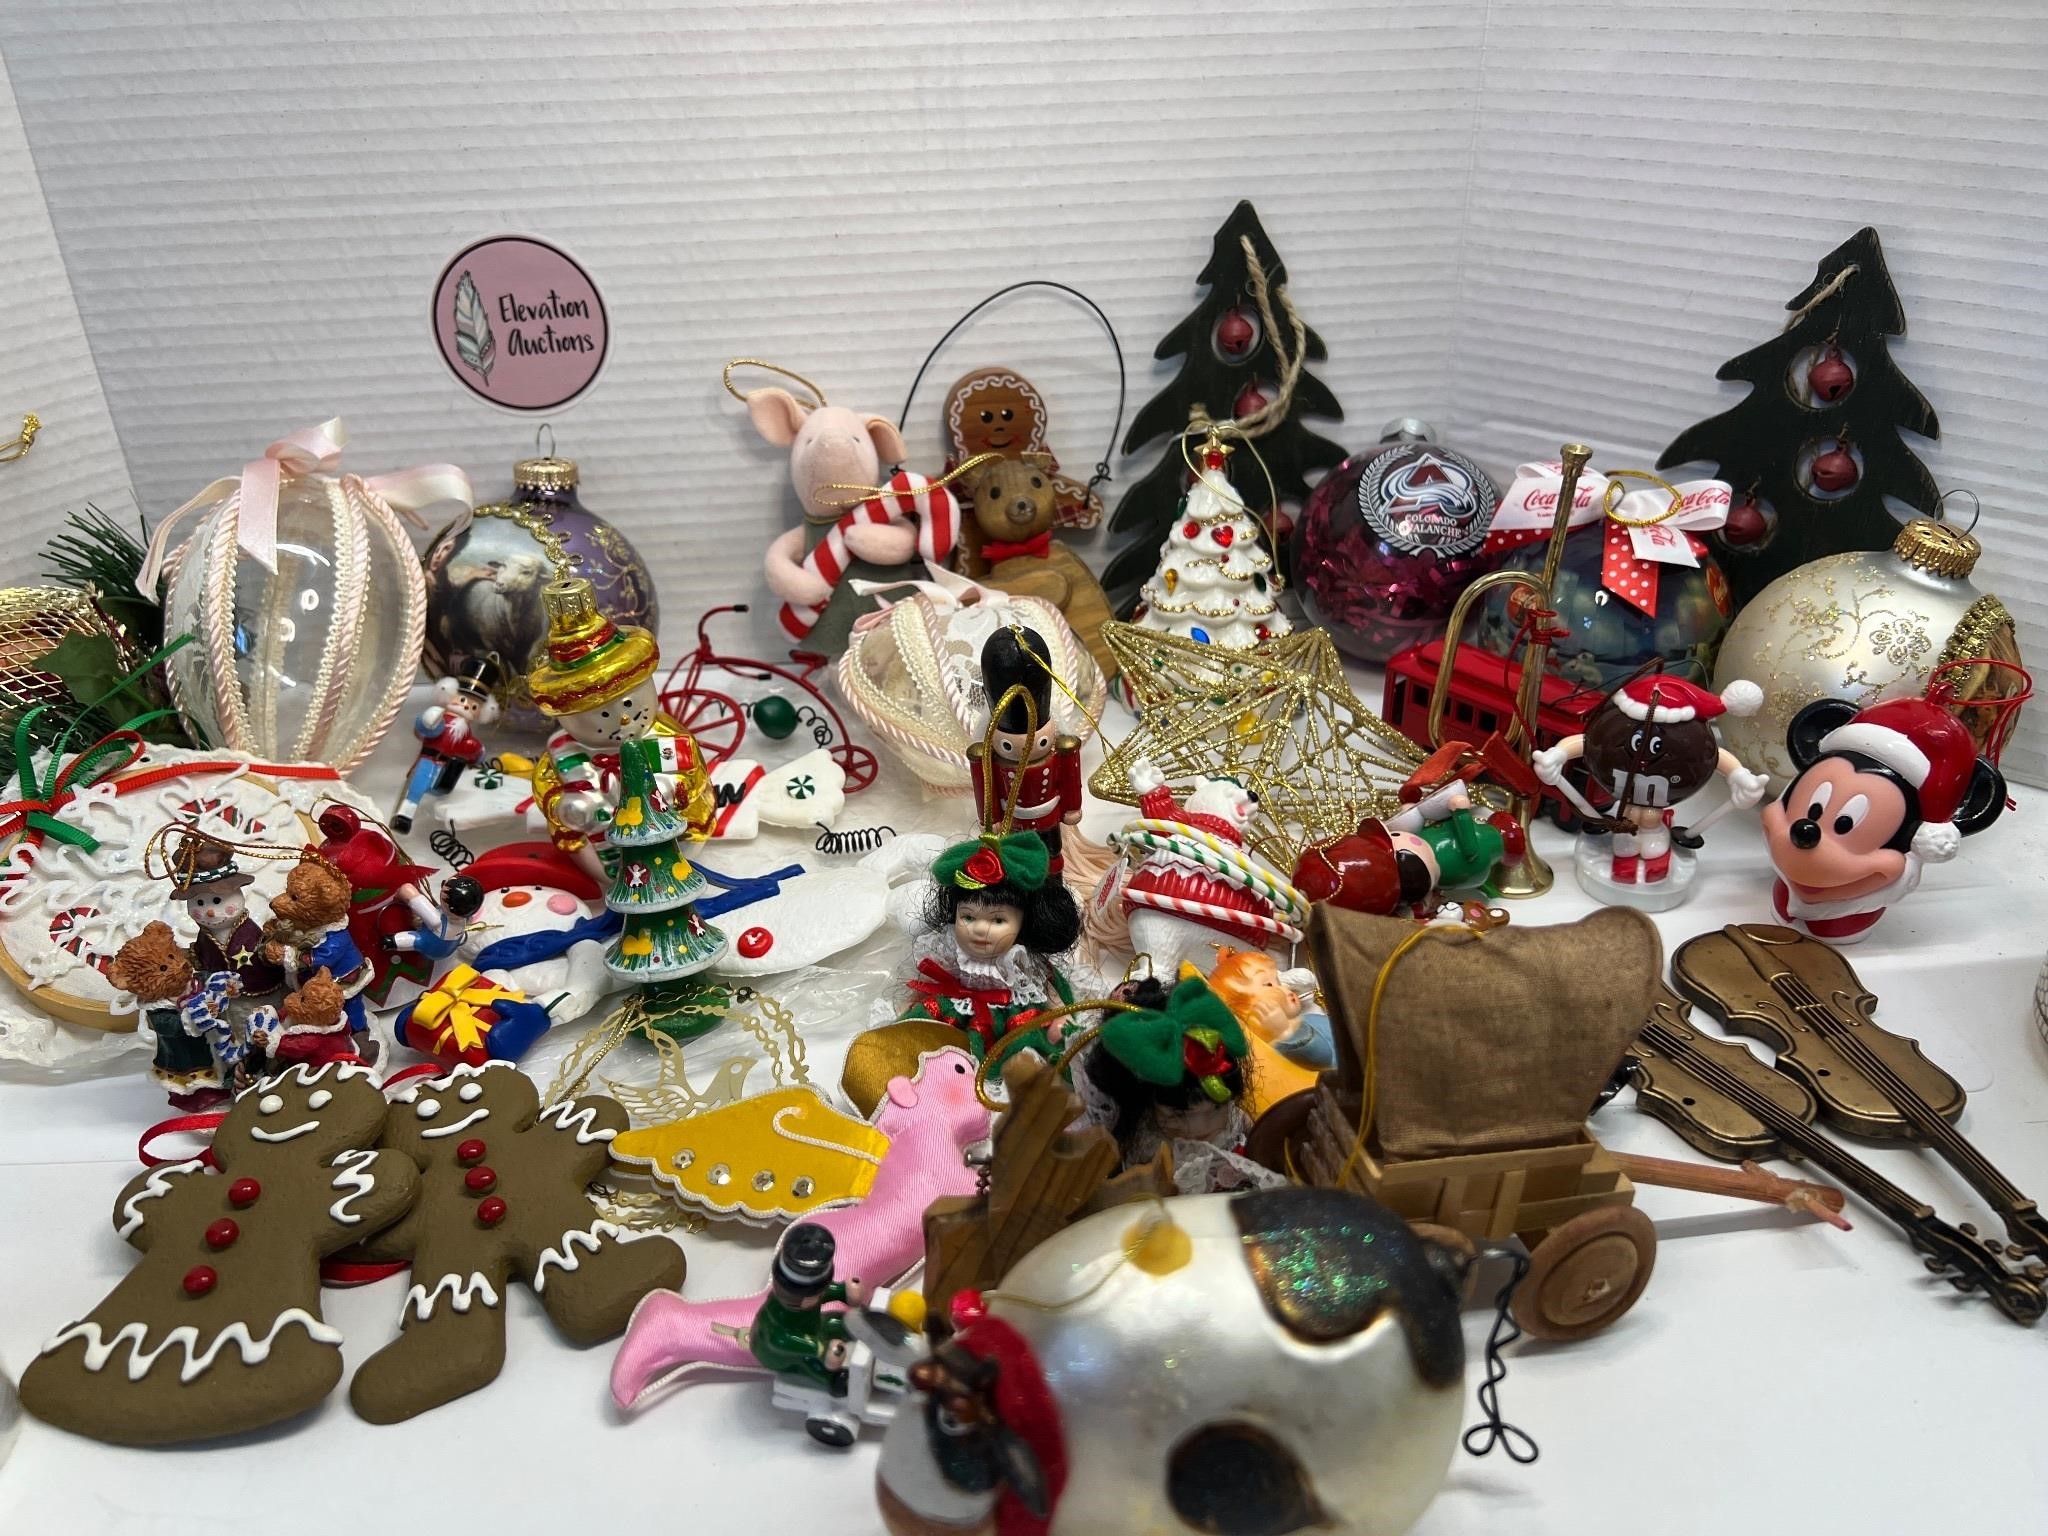 Large Lot of Christmas Ornaments